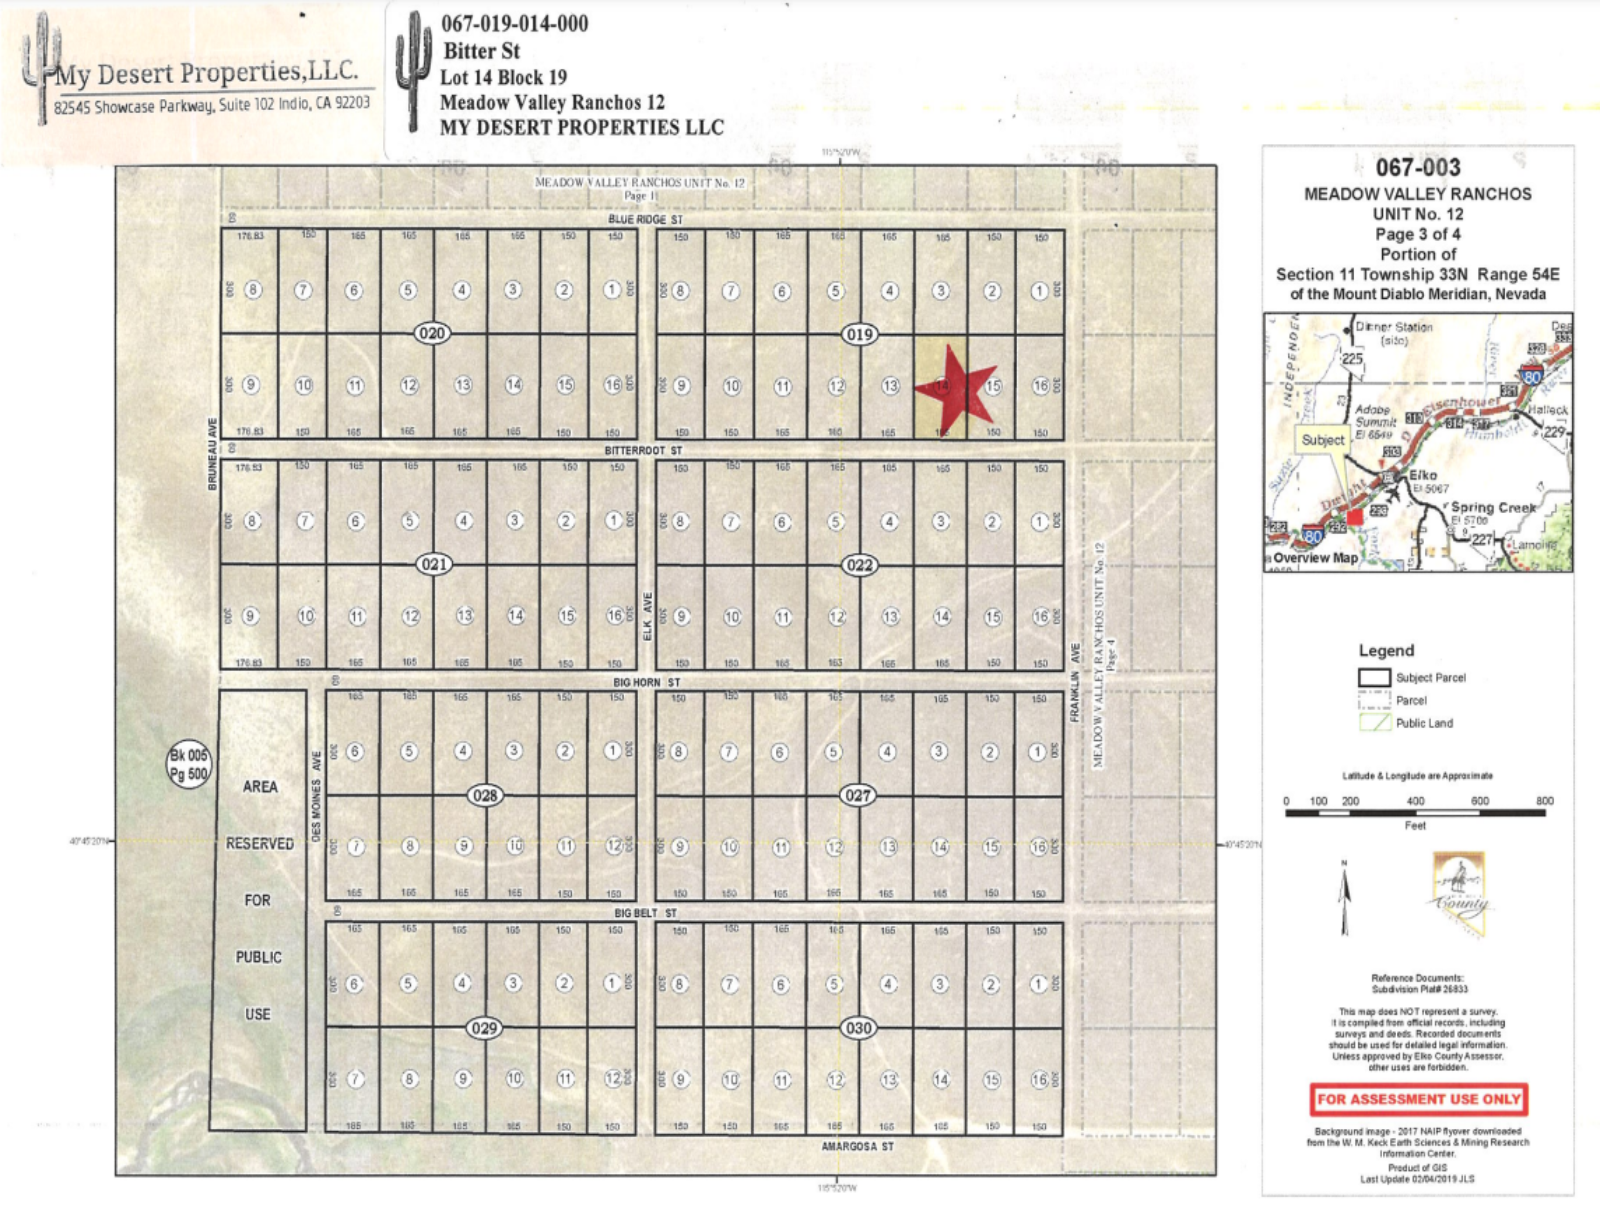 *NEW* OVERSIZED RESIDENTIAL LOT IN ELKO COUNTY!! LOW MONTHLY PAYMENTS OF $175.00 Bitterroot St., Elko, NV 89801 APN: 067-019-014 - Get Land Today